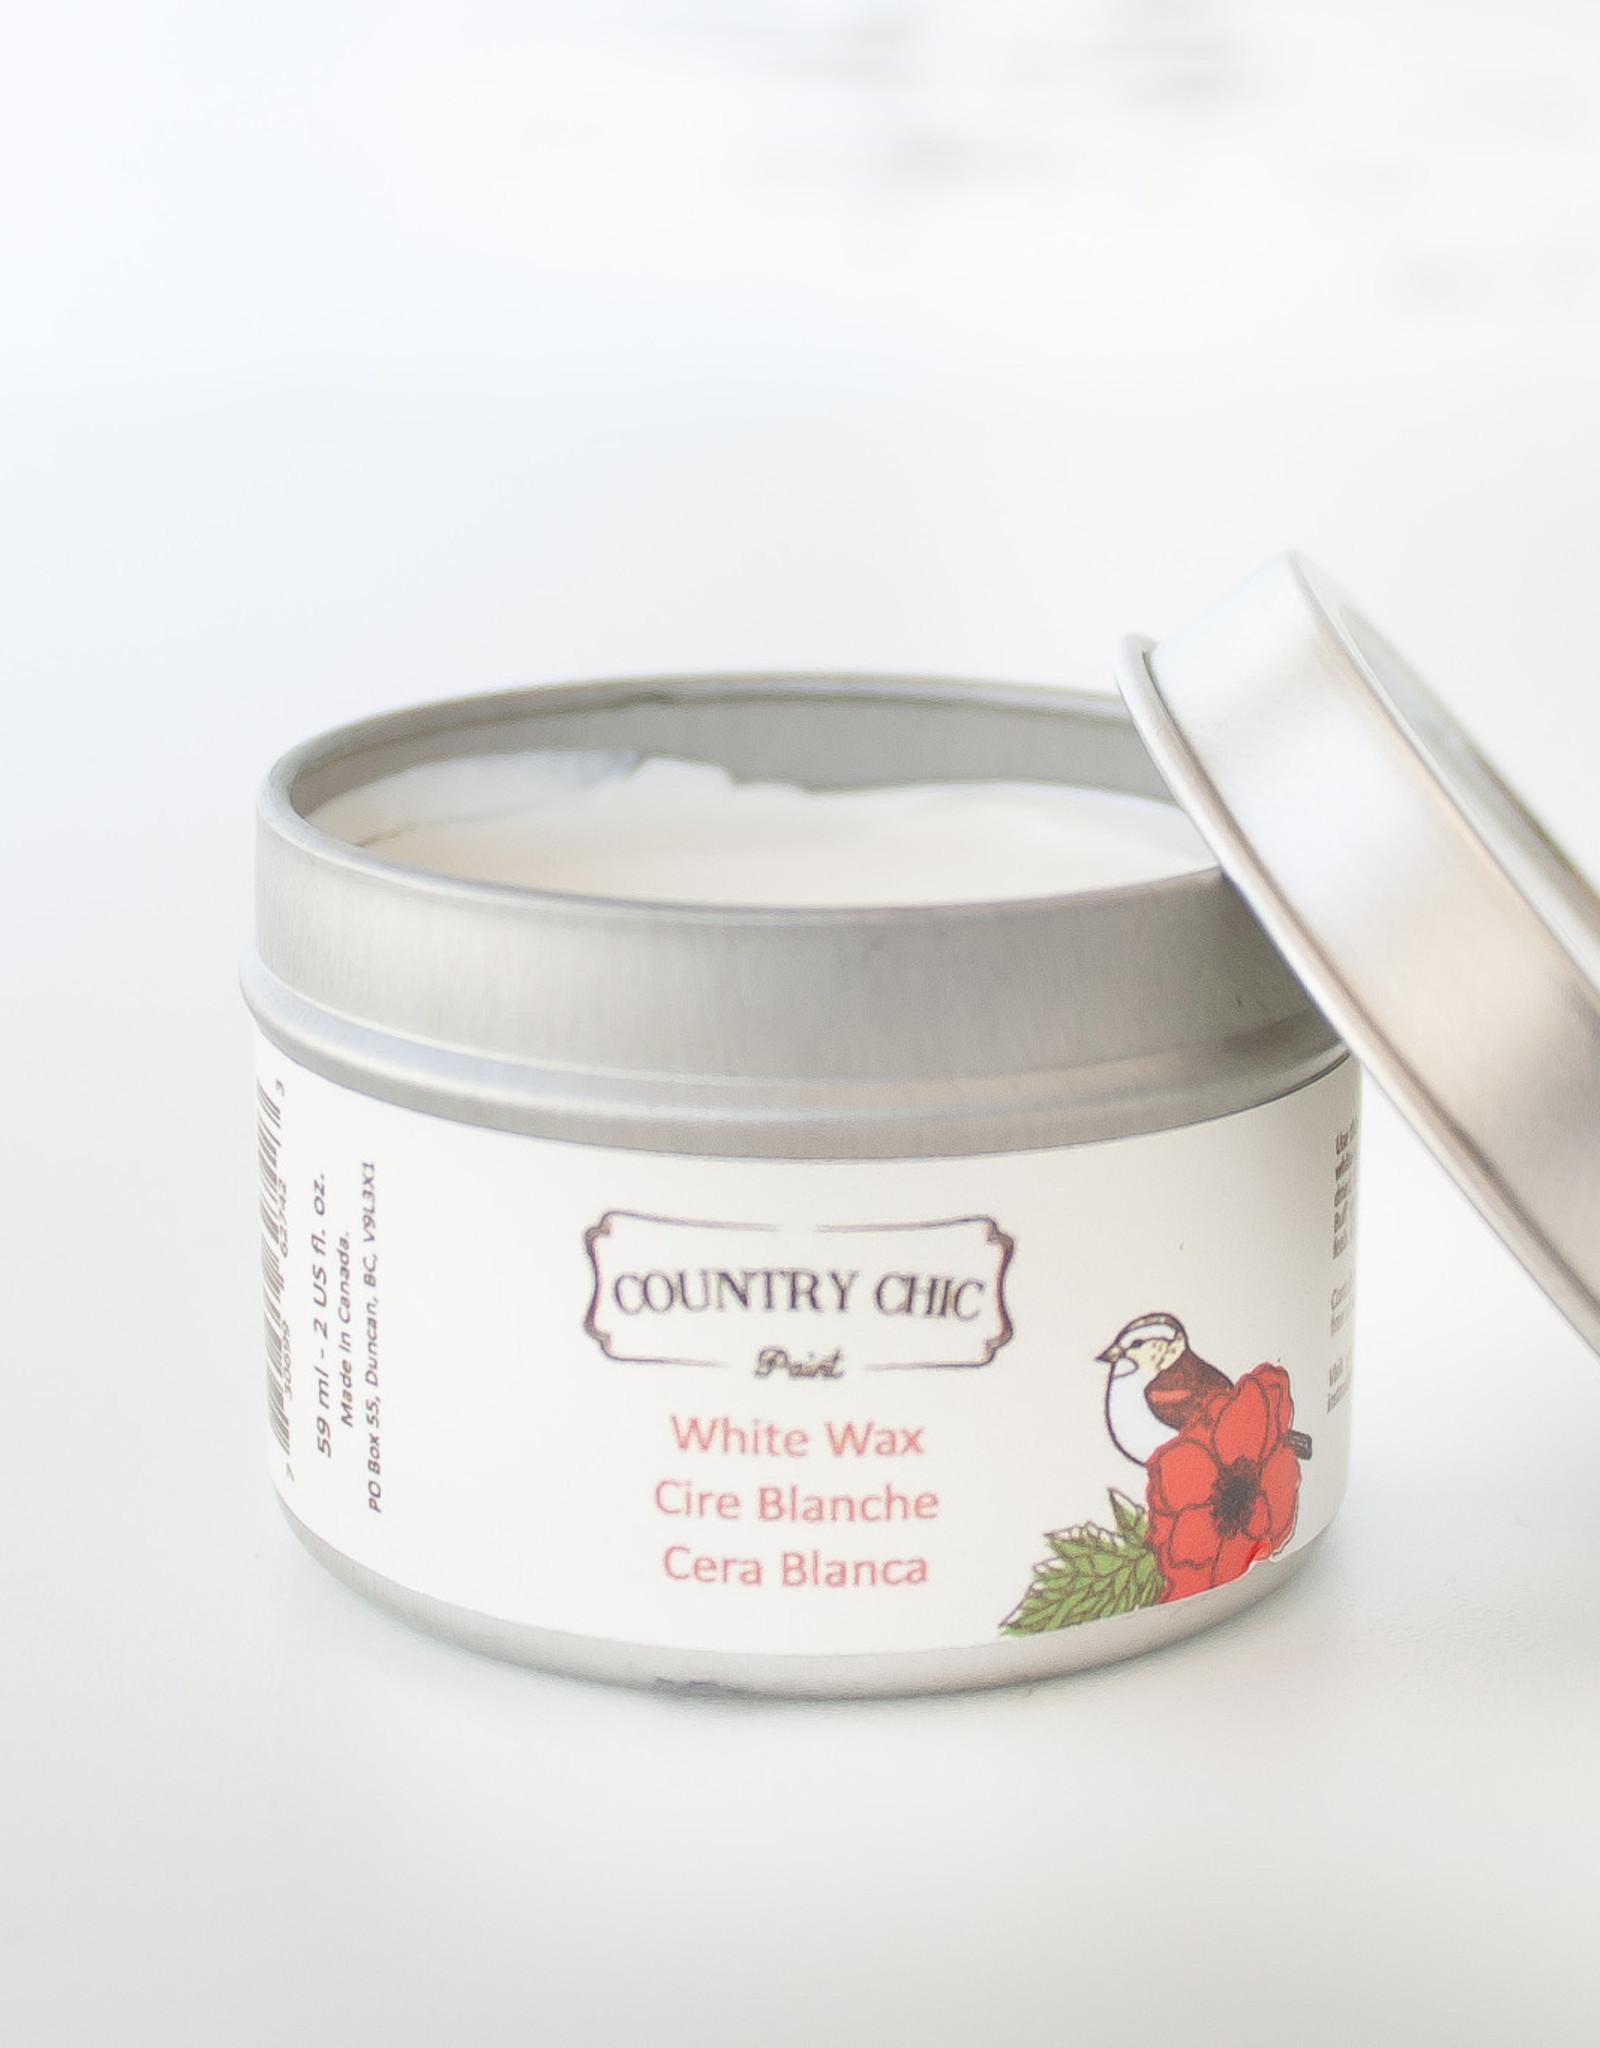 Country Chic Country Chic White Wax 2oz